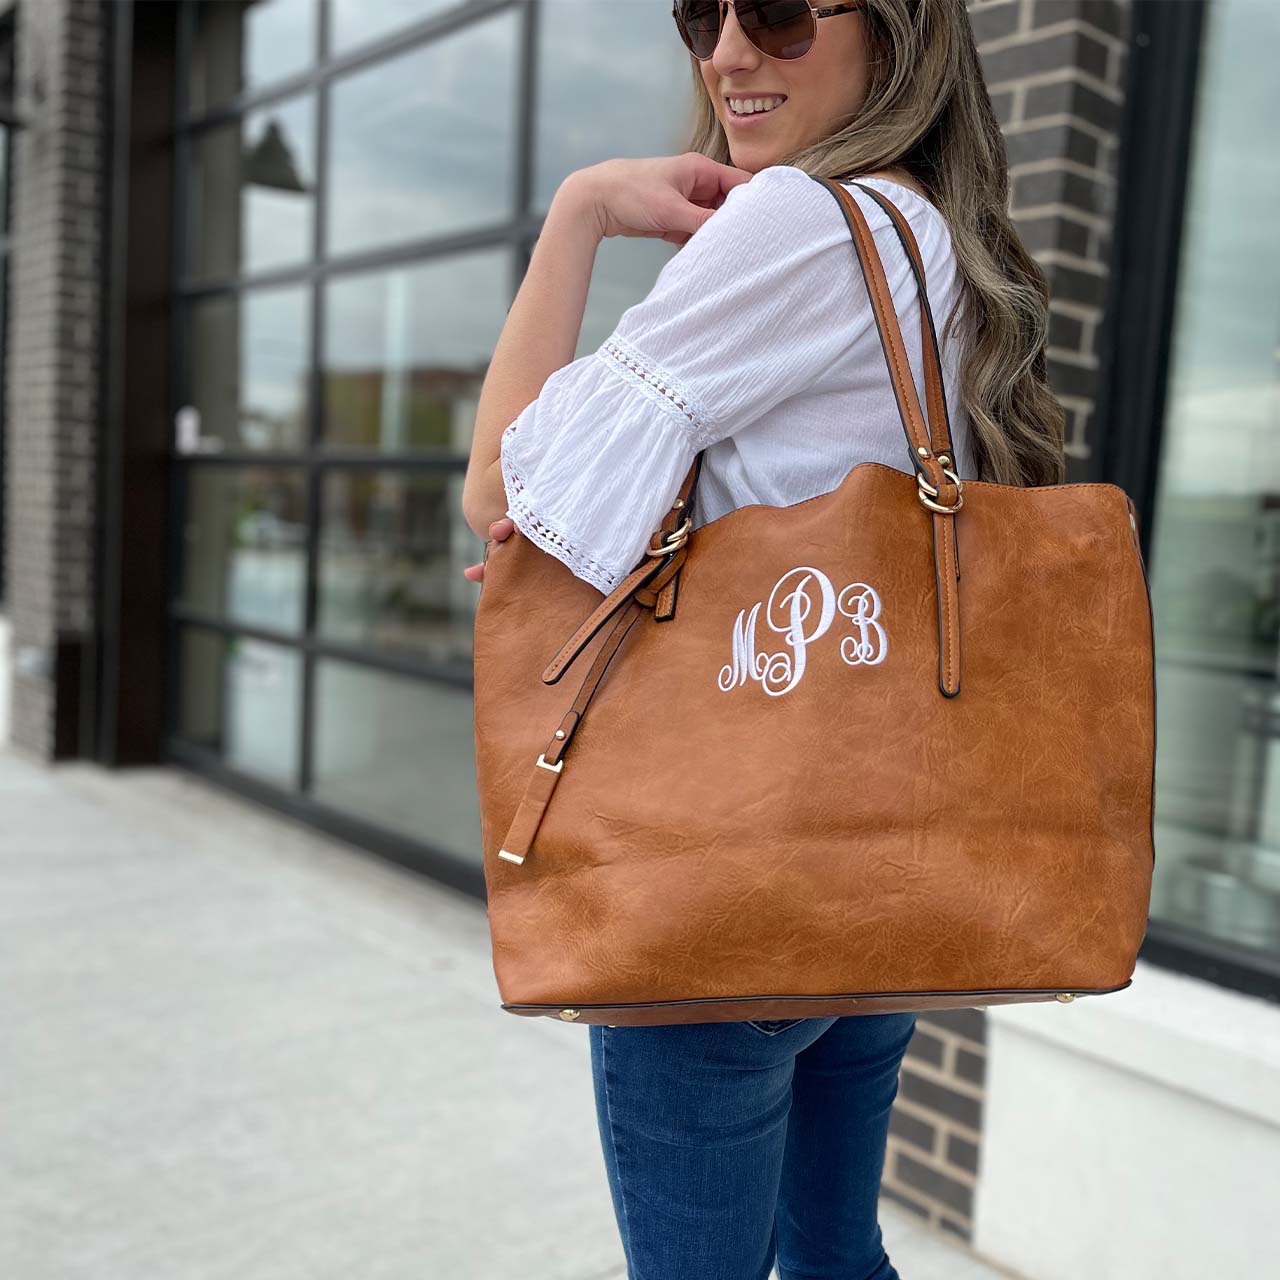 Monogrammed Purse Tote